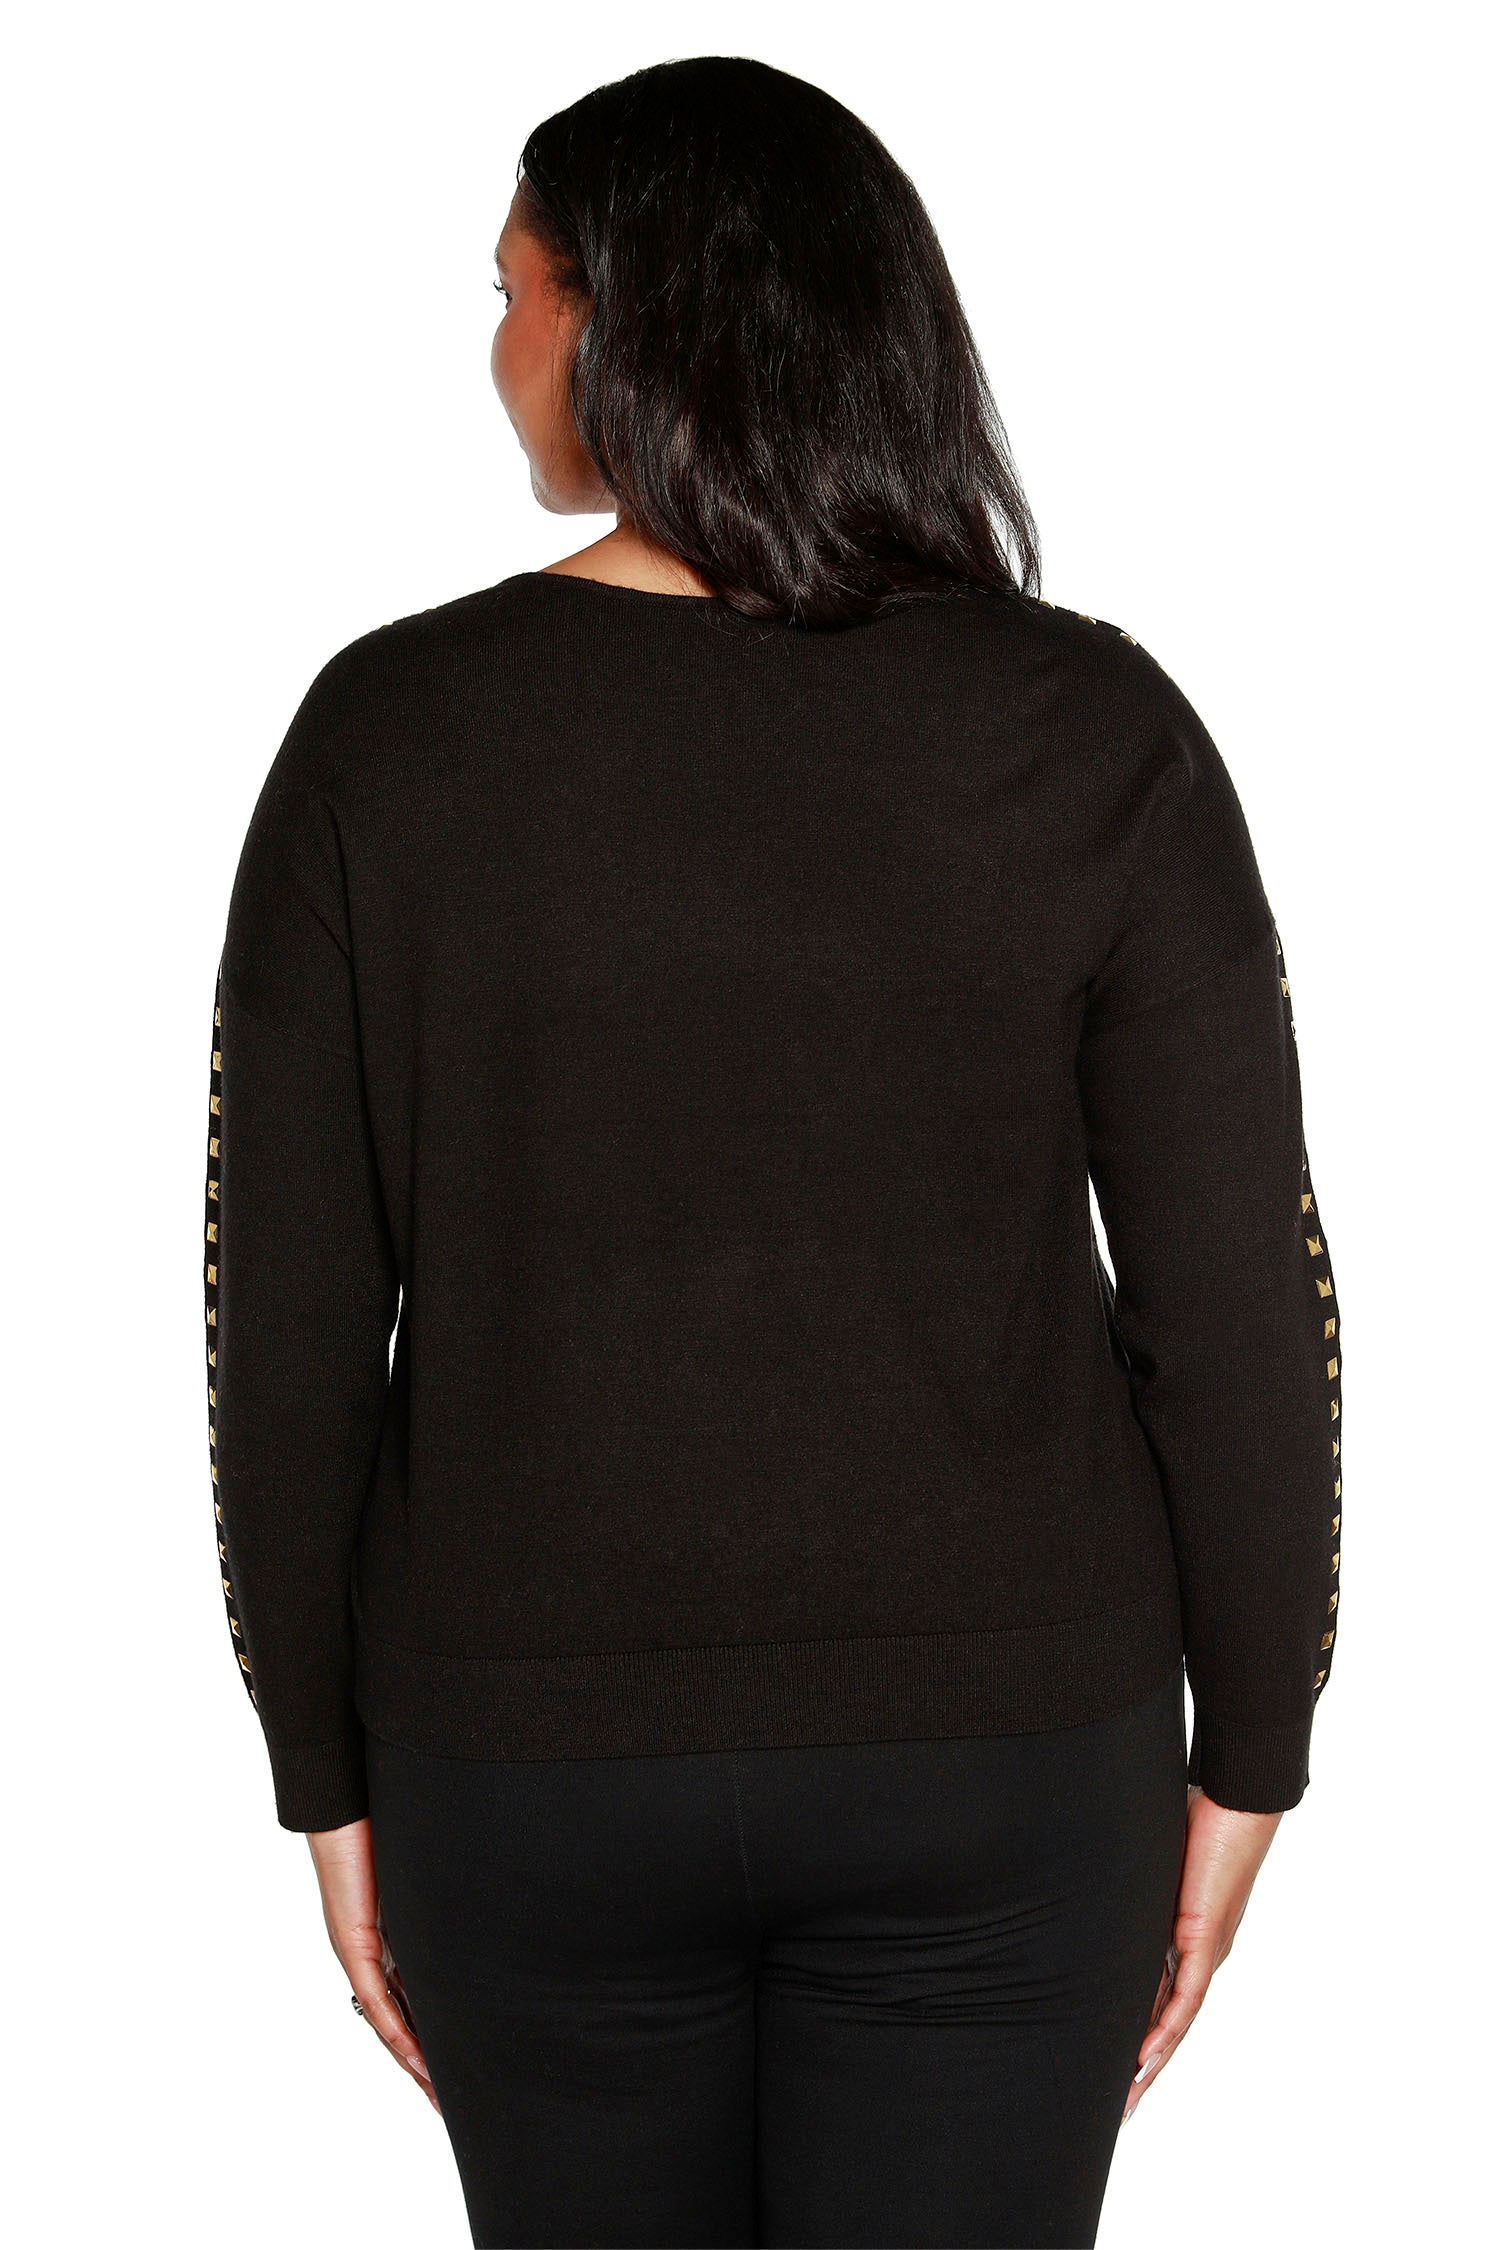 Women’s Lightweight Boat Neck Sweater with Rhinestones and Studs | Curvy